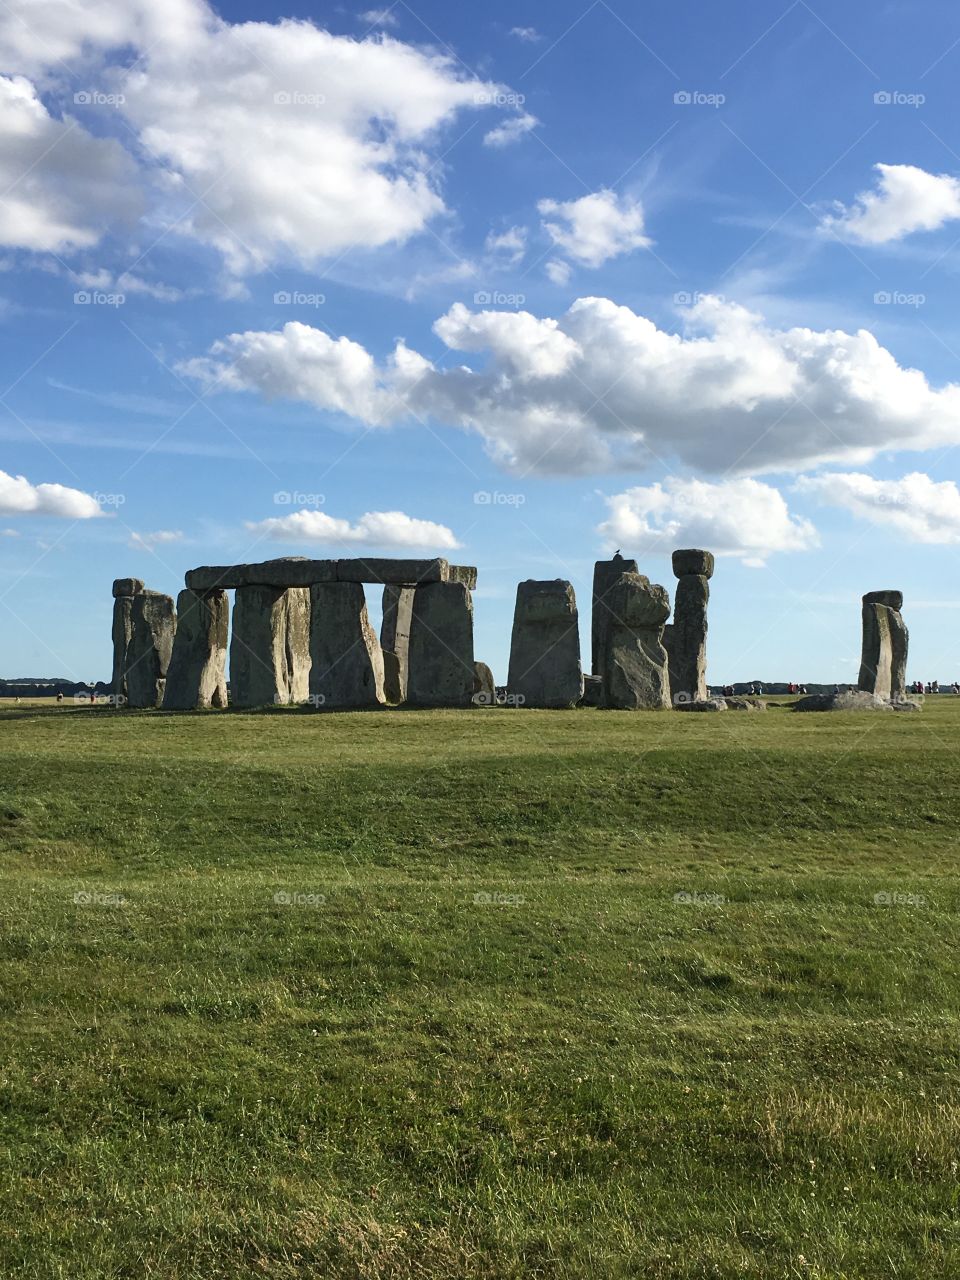 View of Stonehenge in Salisbury England. This prehistoric monument dates back to 3100 BC and still stands today 